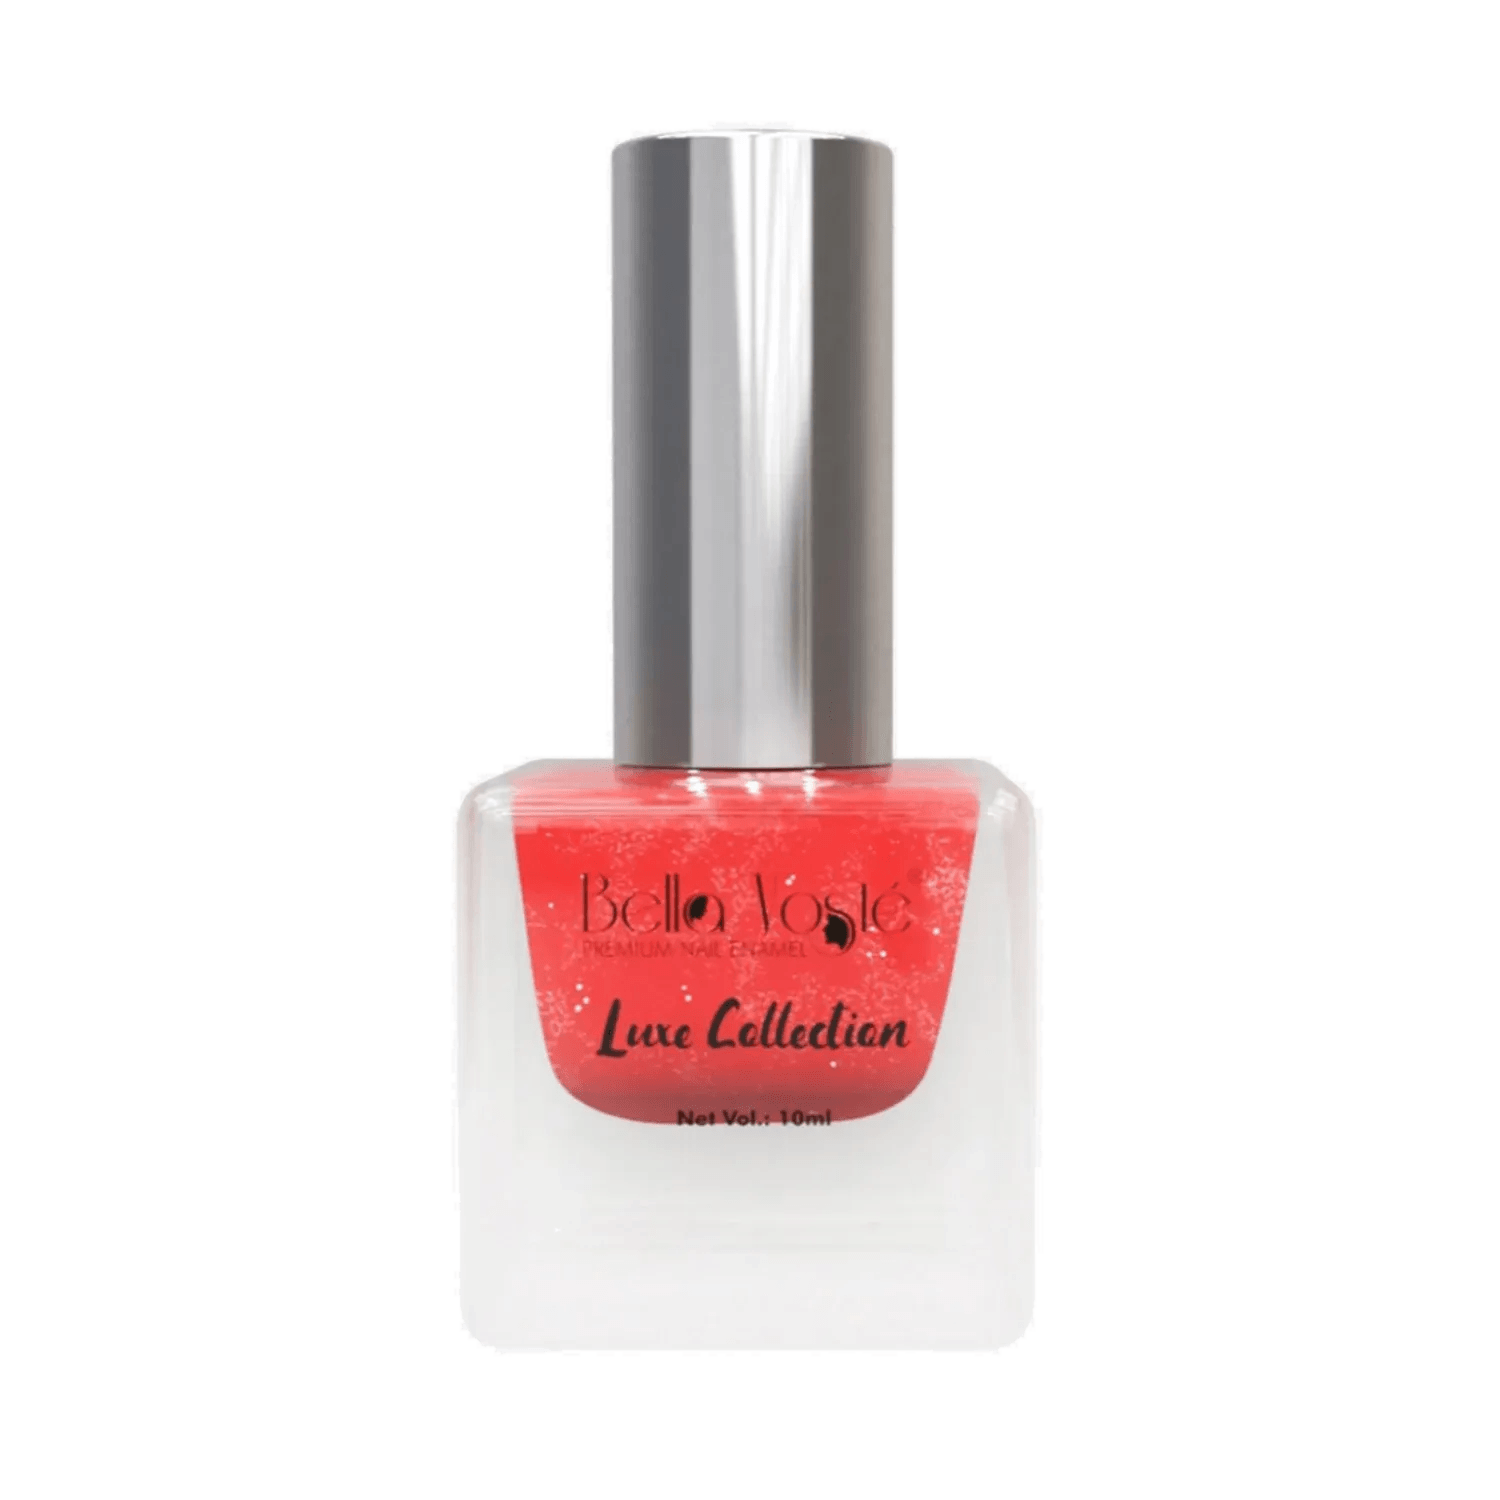 Bella Voste Luxe Celebrations Nail Polish - Shade 205 (10ml)